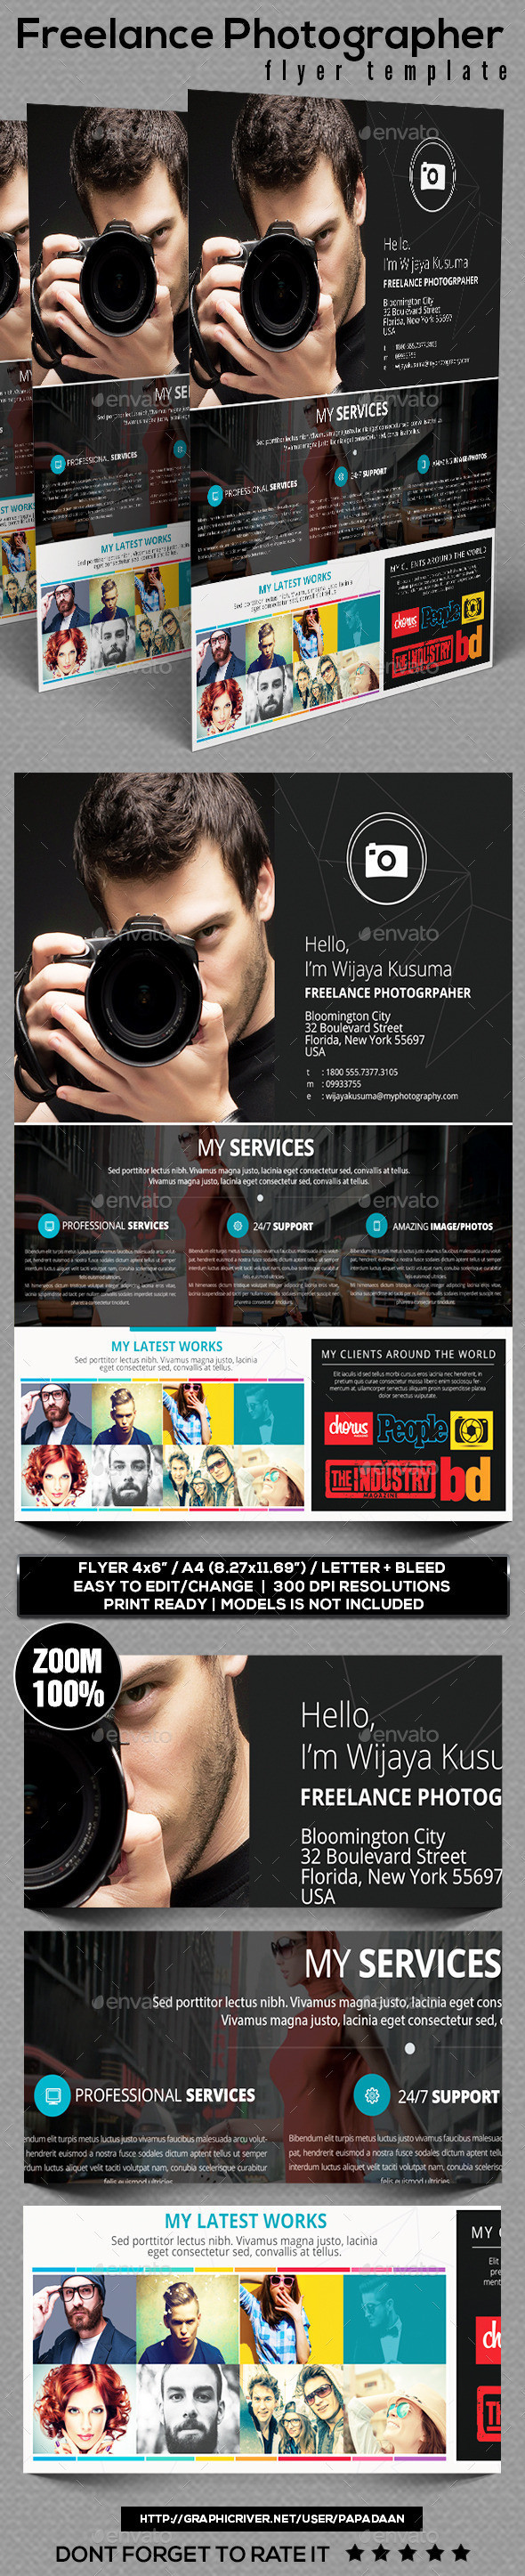 Freelance 20photographer 20flyer 20template 20preview